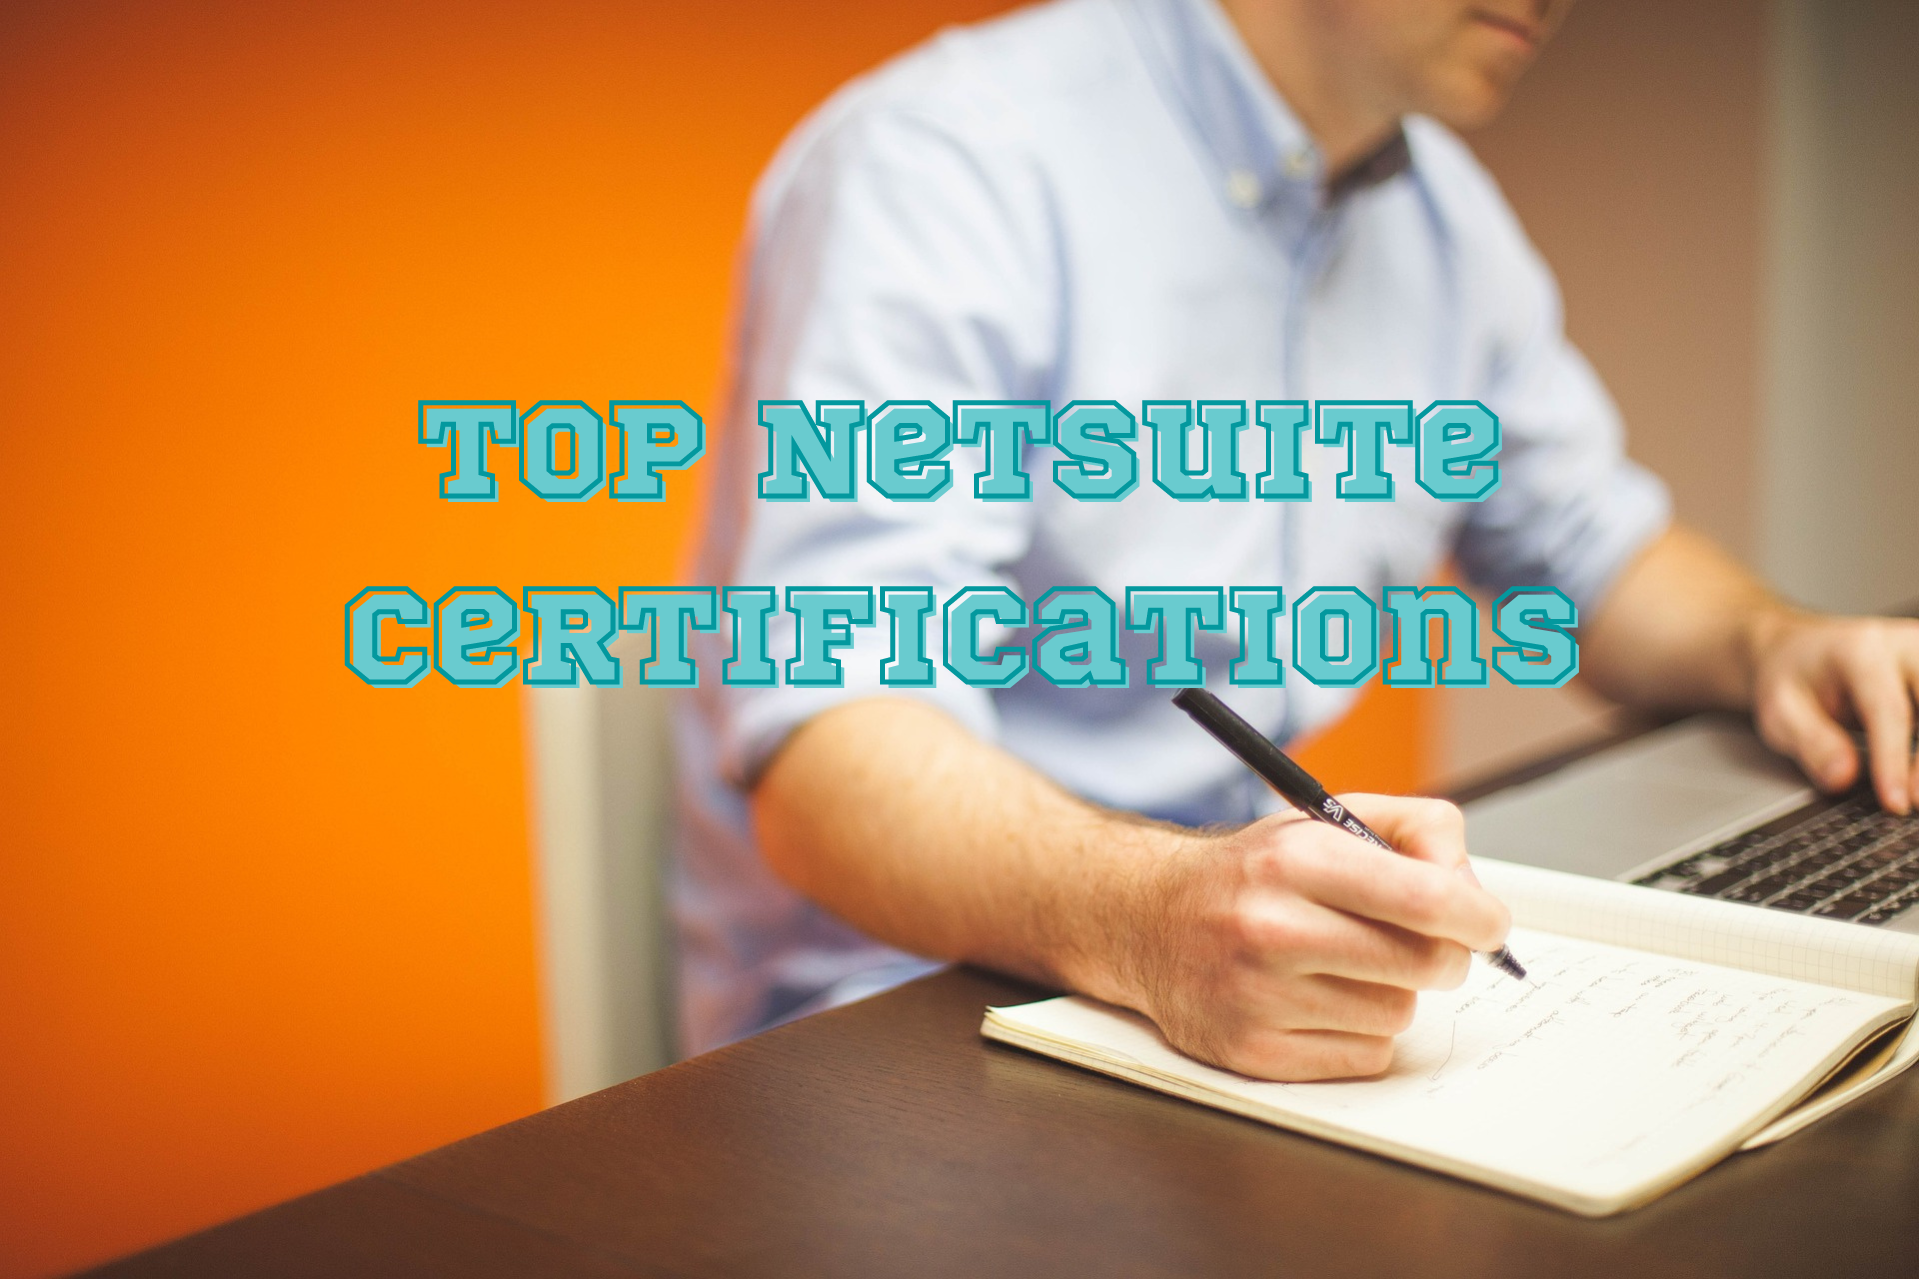 Top NetSuite Certifications in 2023: An Overview